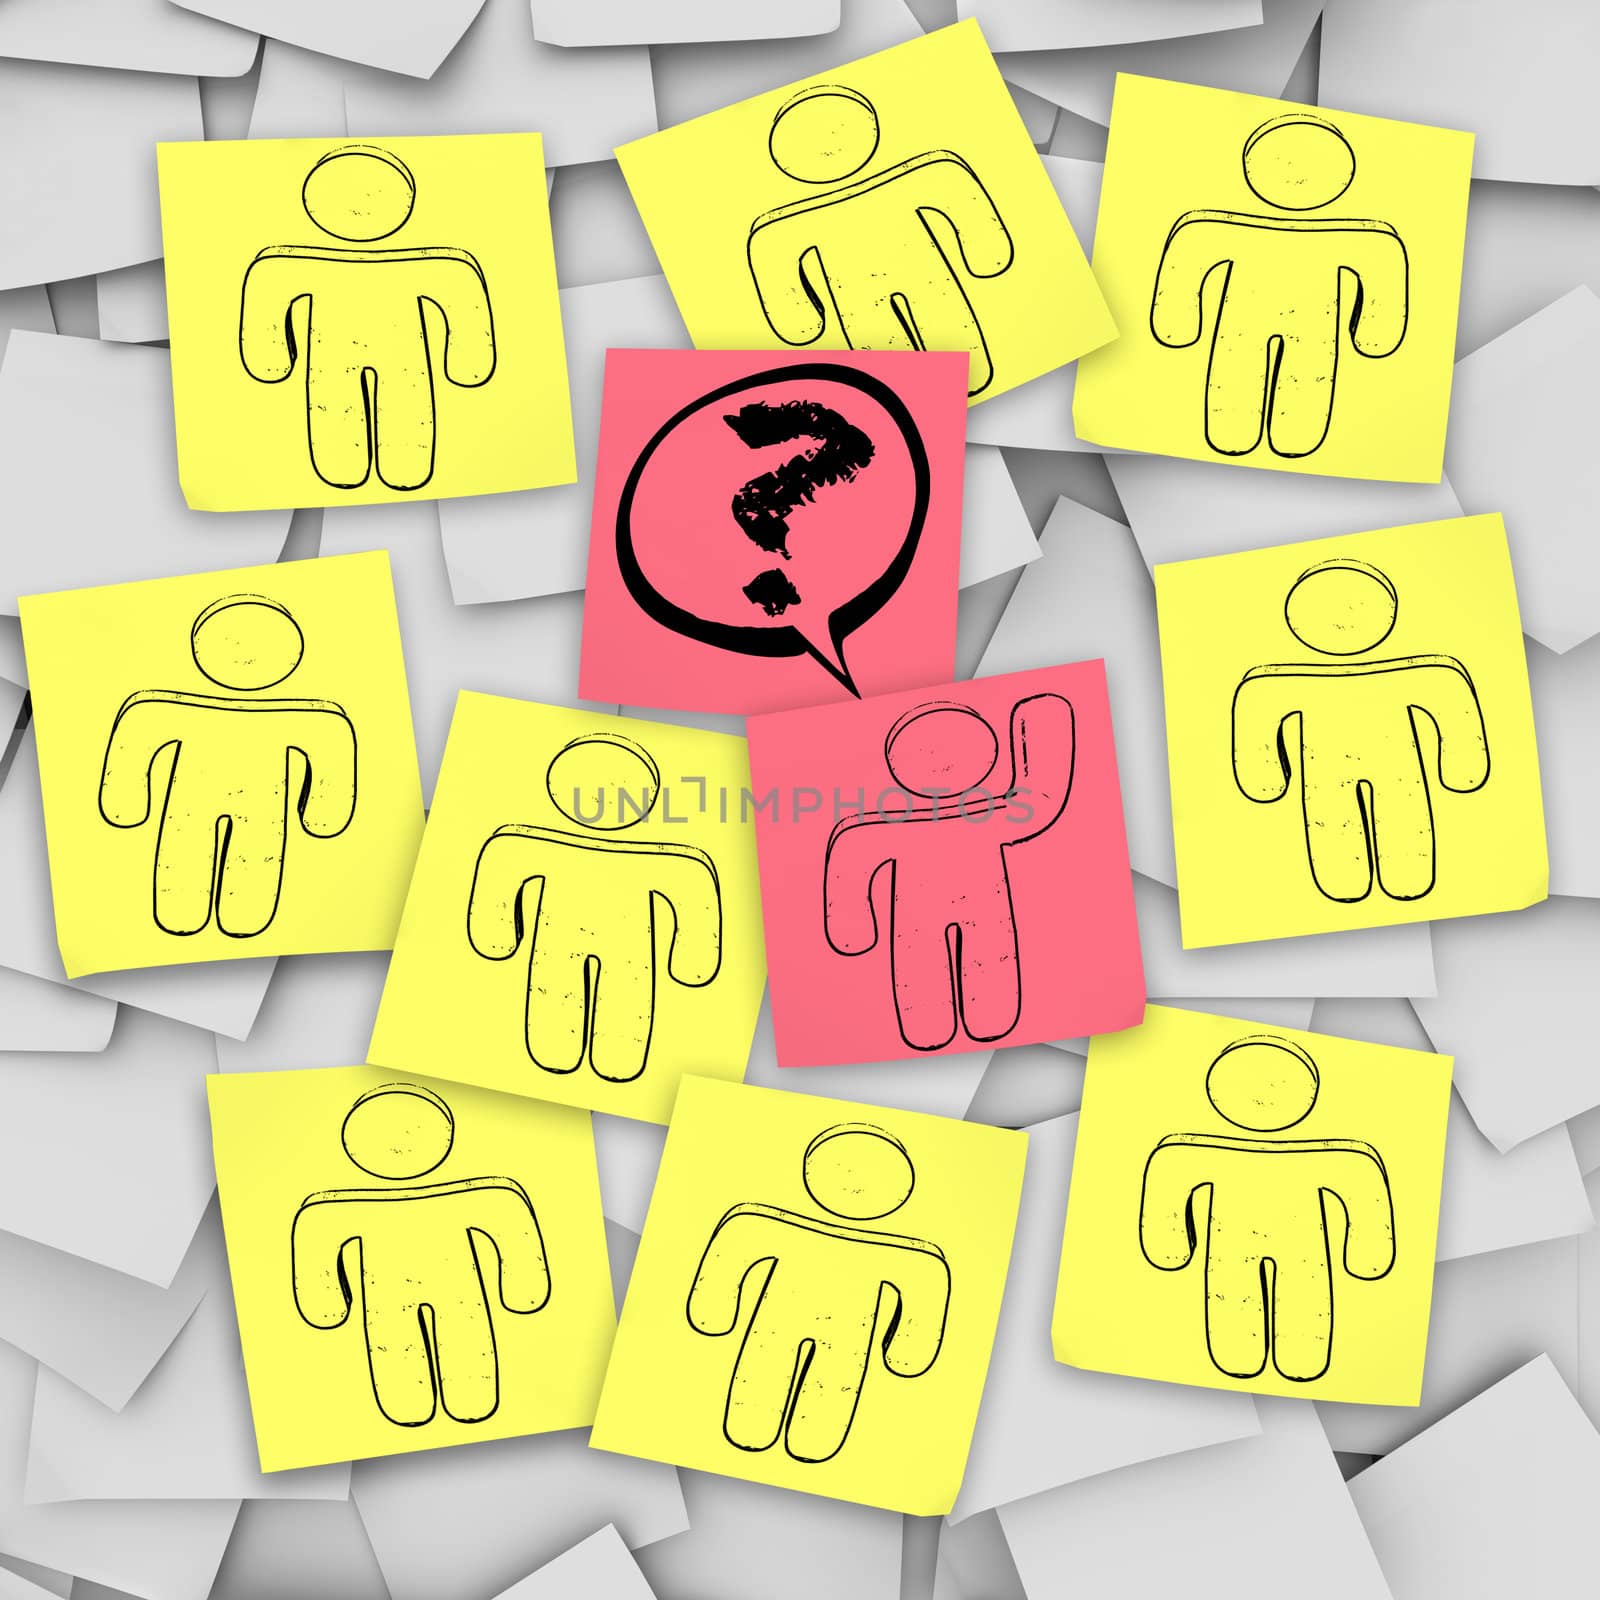 One person in the group raises his hand with a question in this episode of Sticky Note Theatre.